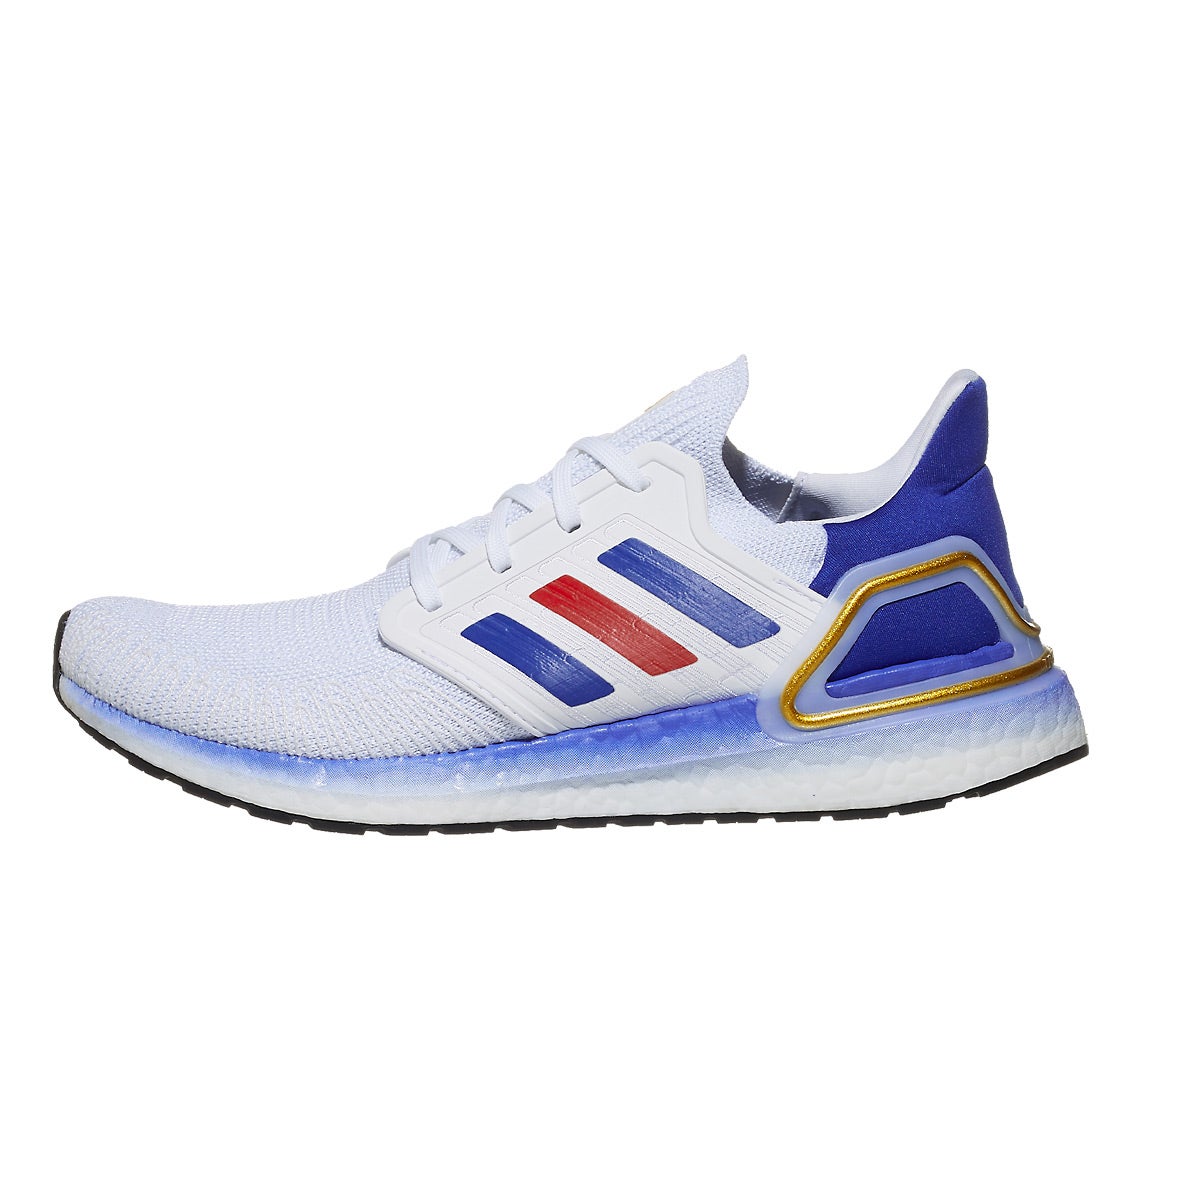 adidas Ultra Boost 20 Men's Shoes 